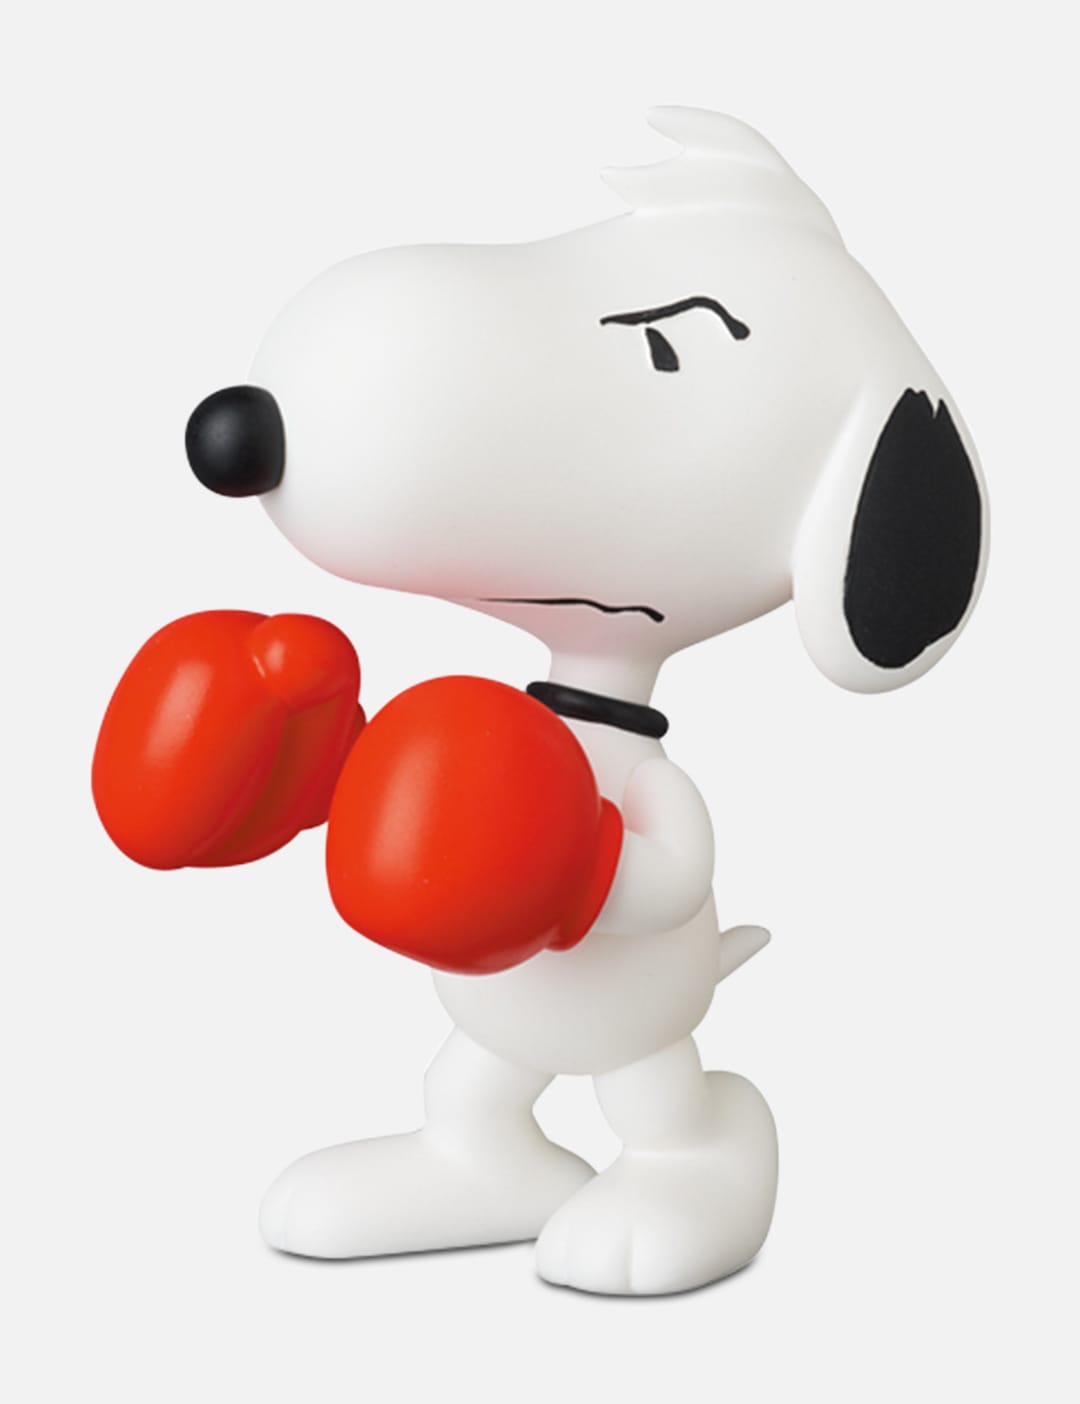 Medicom Toy - VCD Snoopy 1957 Ver. | HBX - Globally Curated 